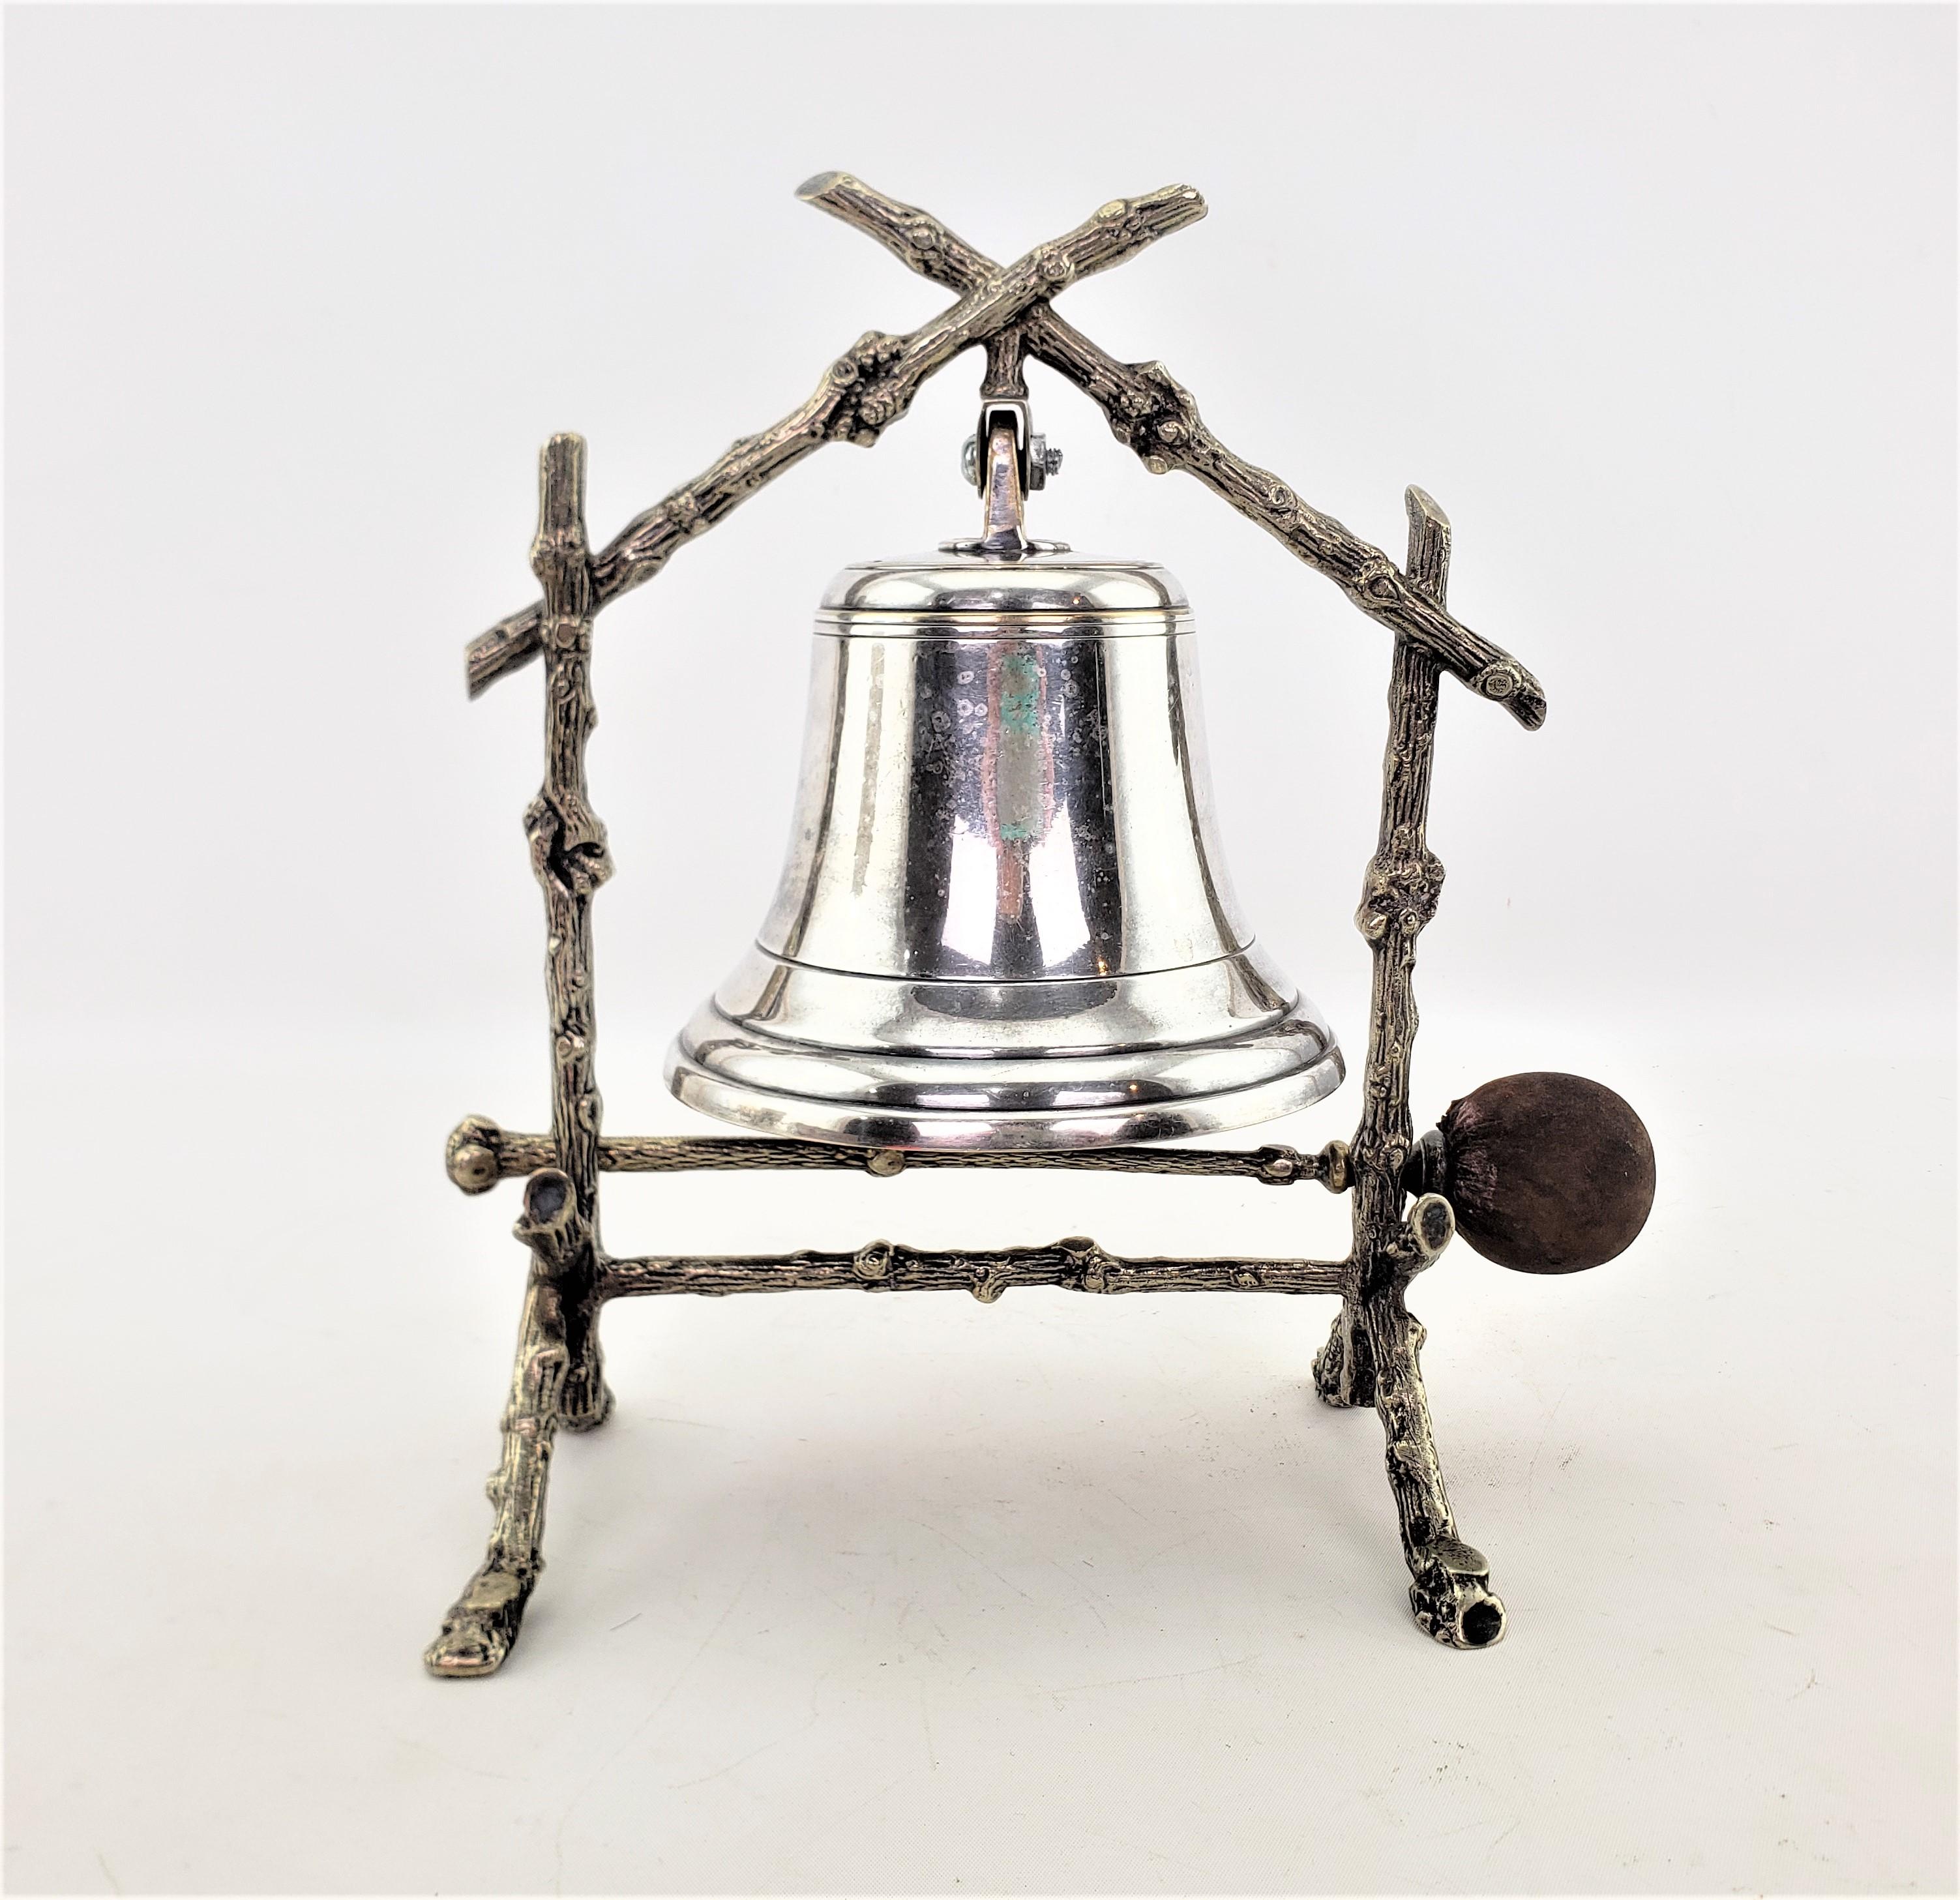 Edwardian Antique Silver Plated Dinner Bell or Gong with Figural Twig & Branch Motif For Sale